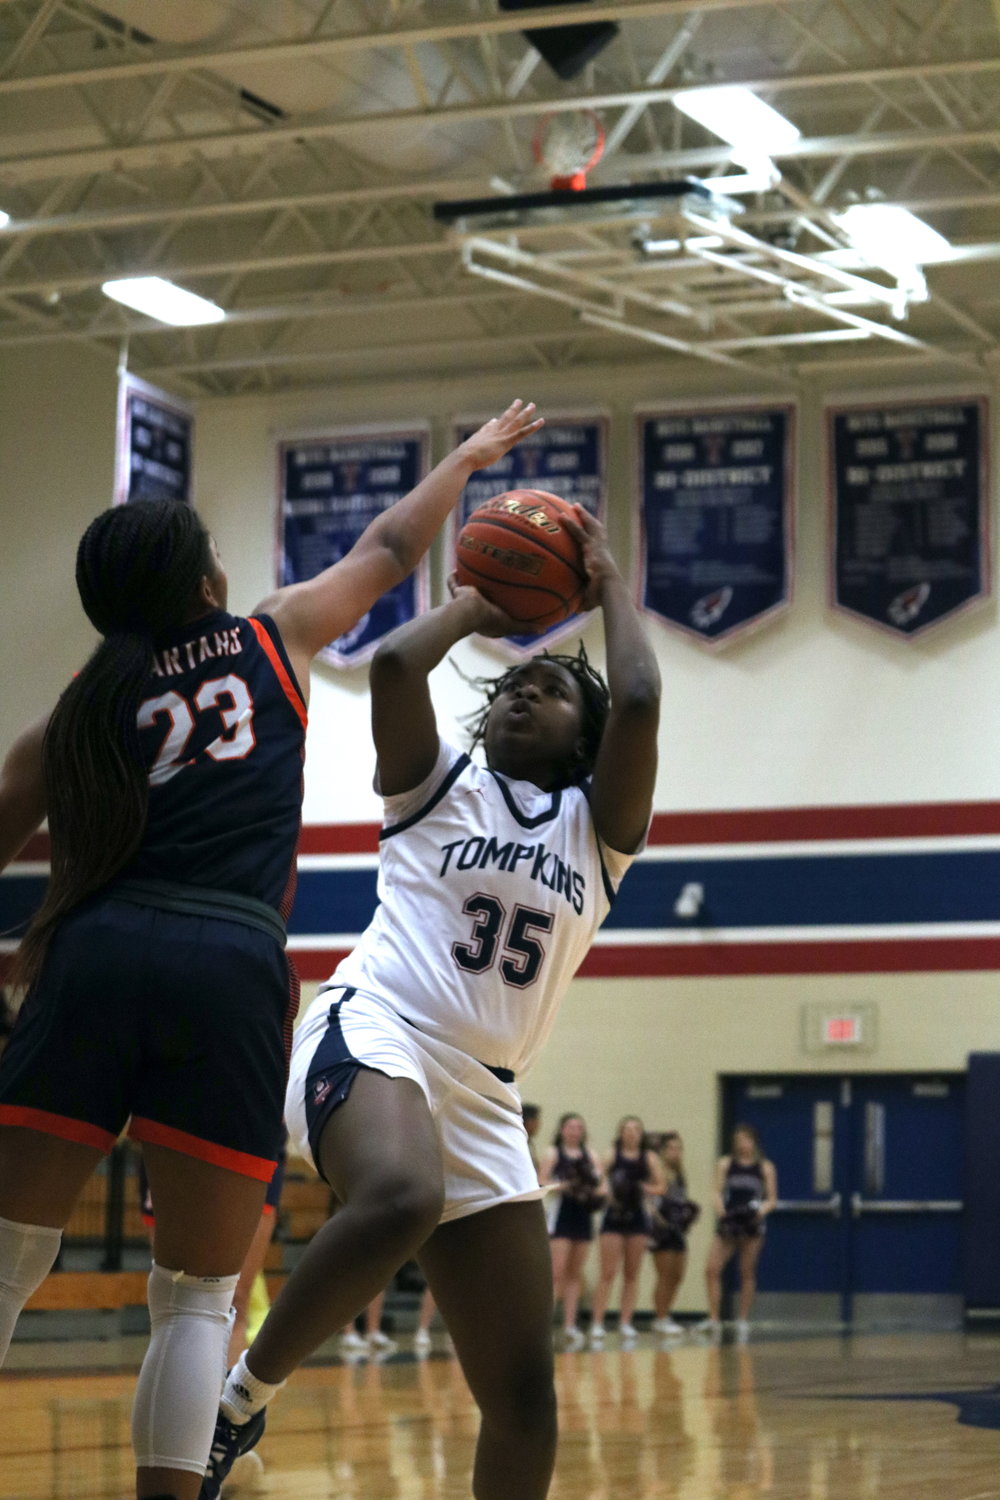 Fiyinfoluwa Adeleye shoots a fadeaway during Tuesday’s District 19-6A game between Tompkins and Seven Lakes at the Tompkins gym.